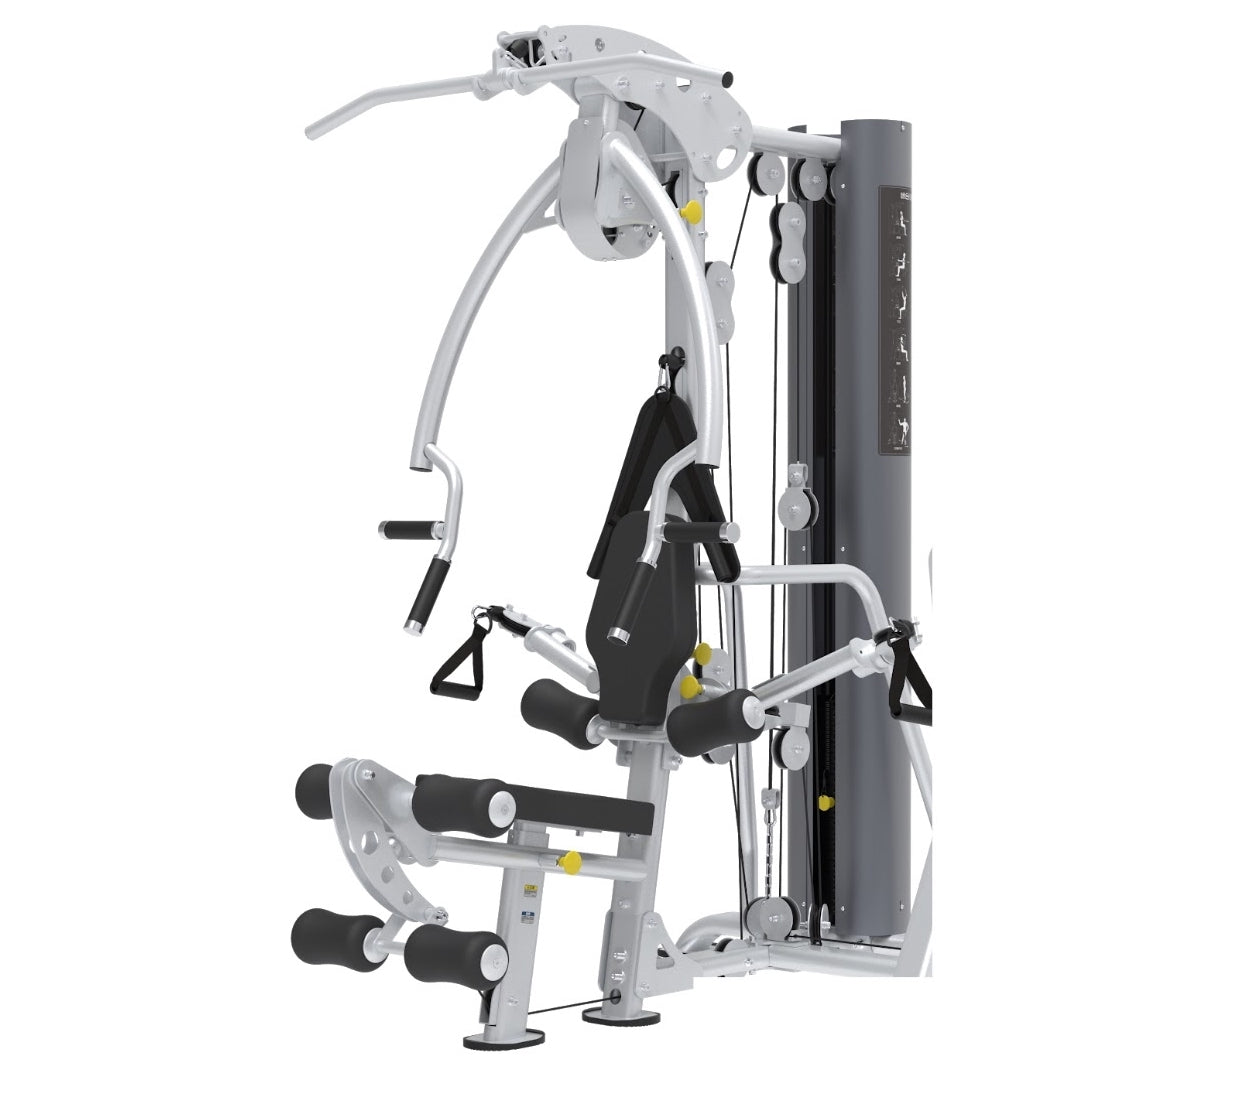 XPT Multi-Station Gym System with Adjustable Cable Cross Arms